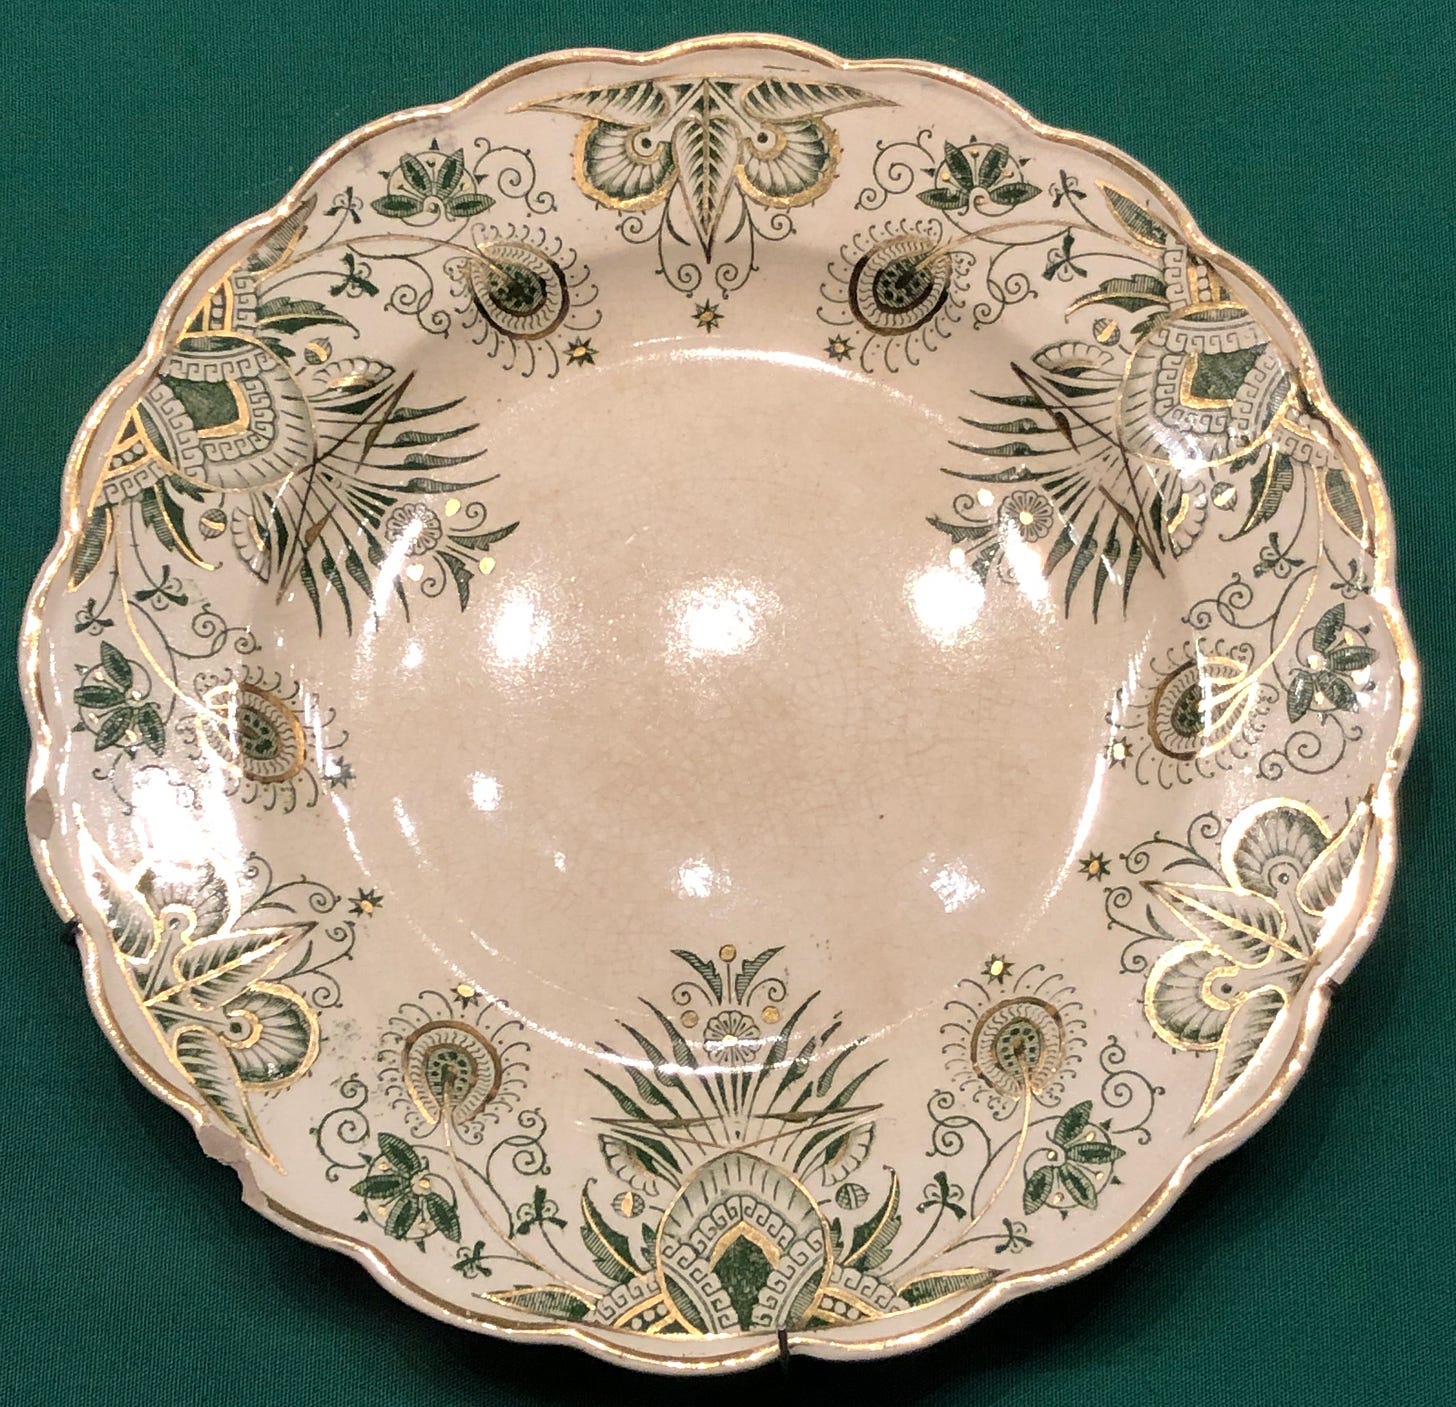 A dinner plate with a patterned edge of greenery and owls.